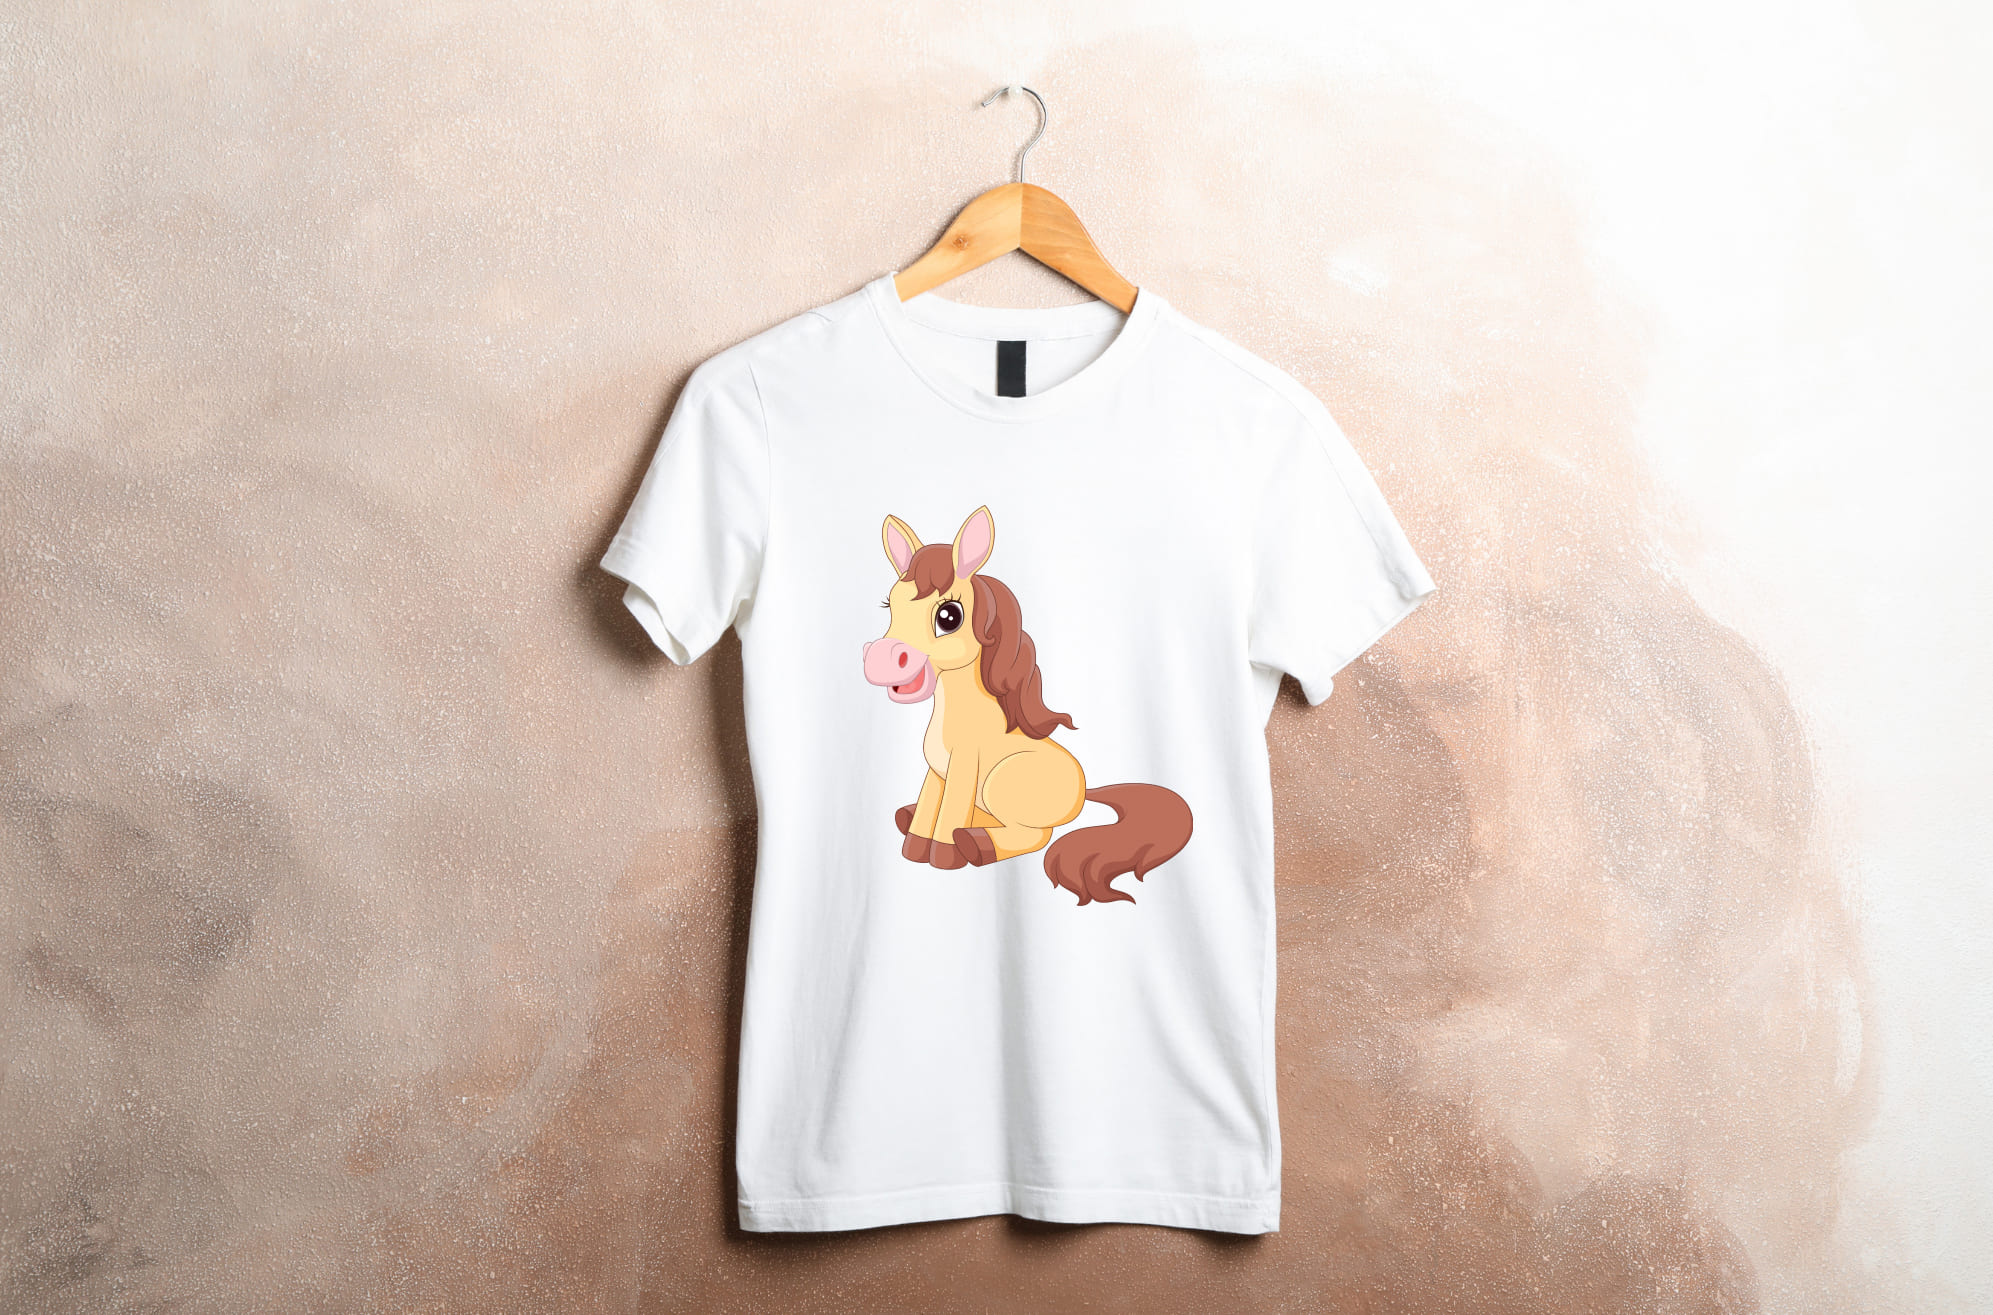 White t-shirt with a sitting horse on a wooden hanger on a beige background.